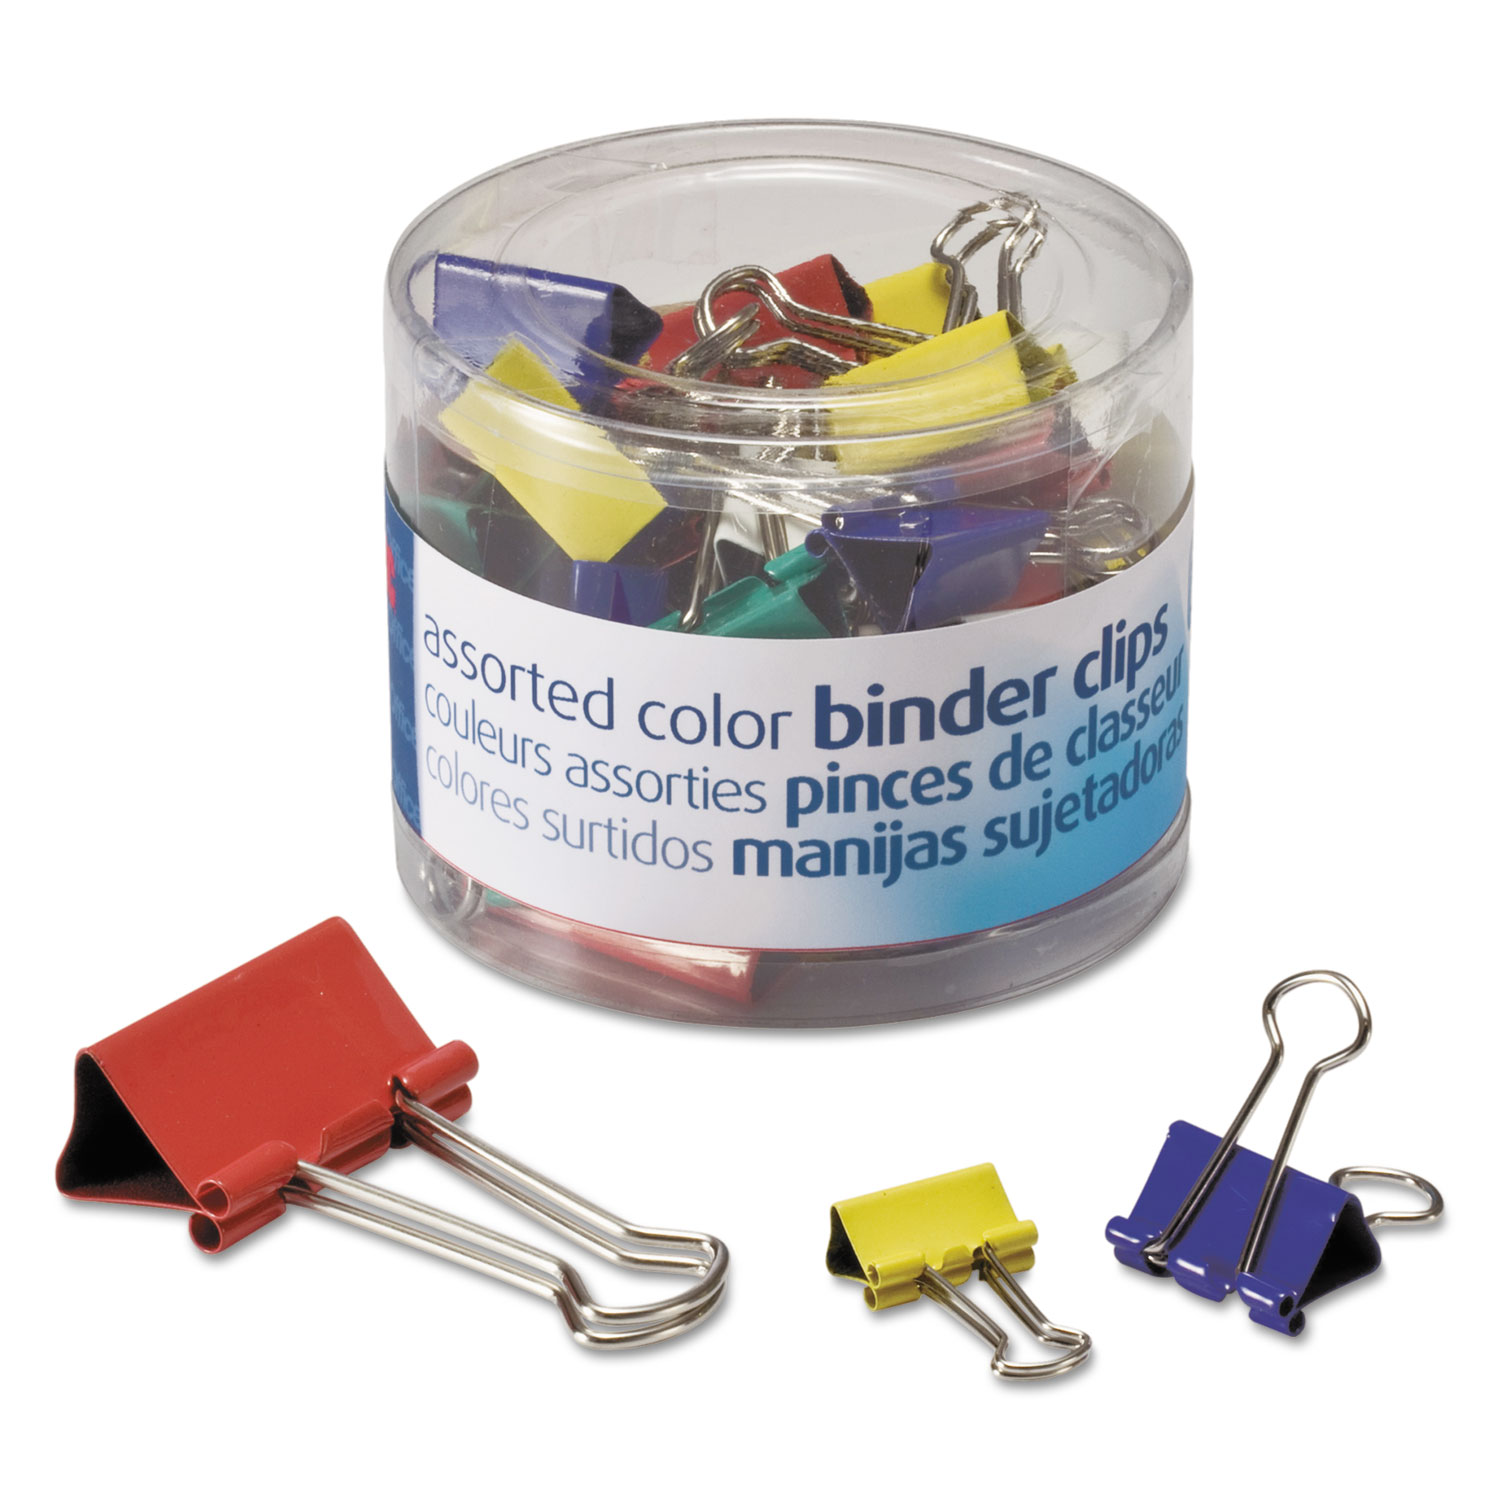  Officemate OIC31026 Assorted Colors Binder Clips, Assorted Sizes, 30/Pack (OIC31026) 